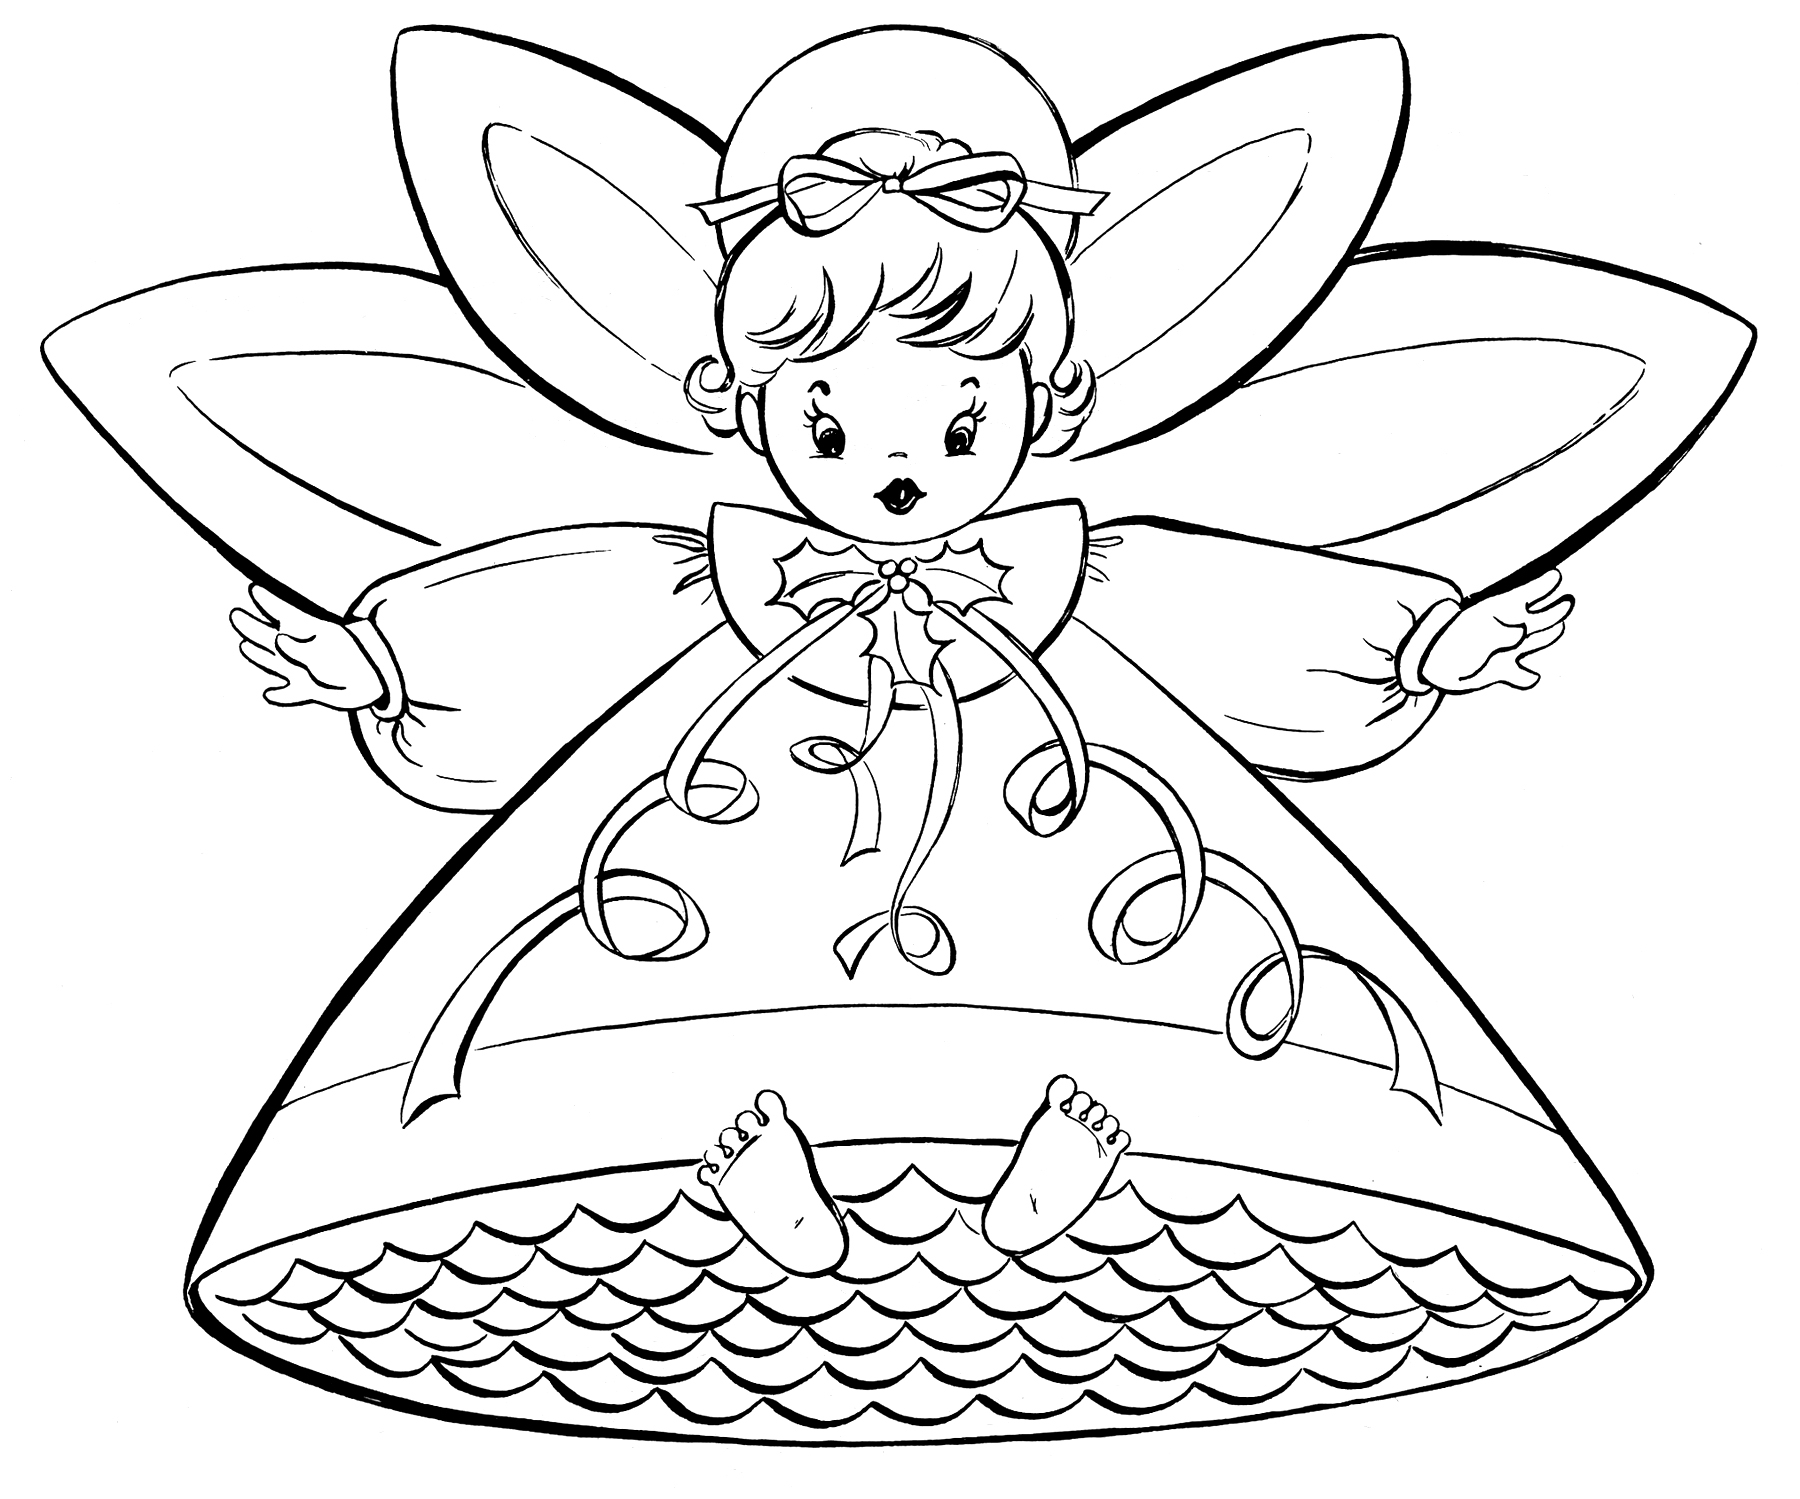 12 Free Printable Christmas Coloring Pages! - The Graphics ...